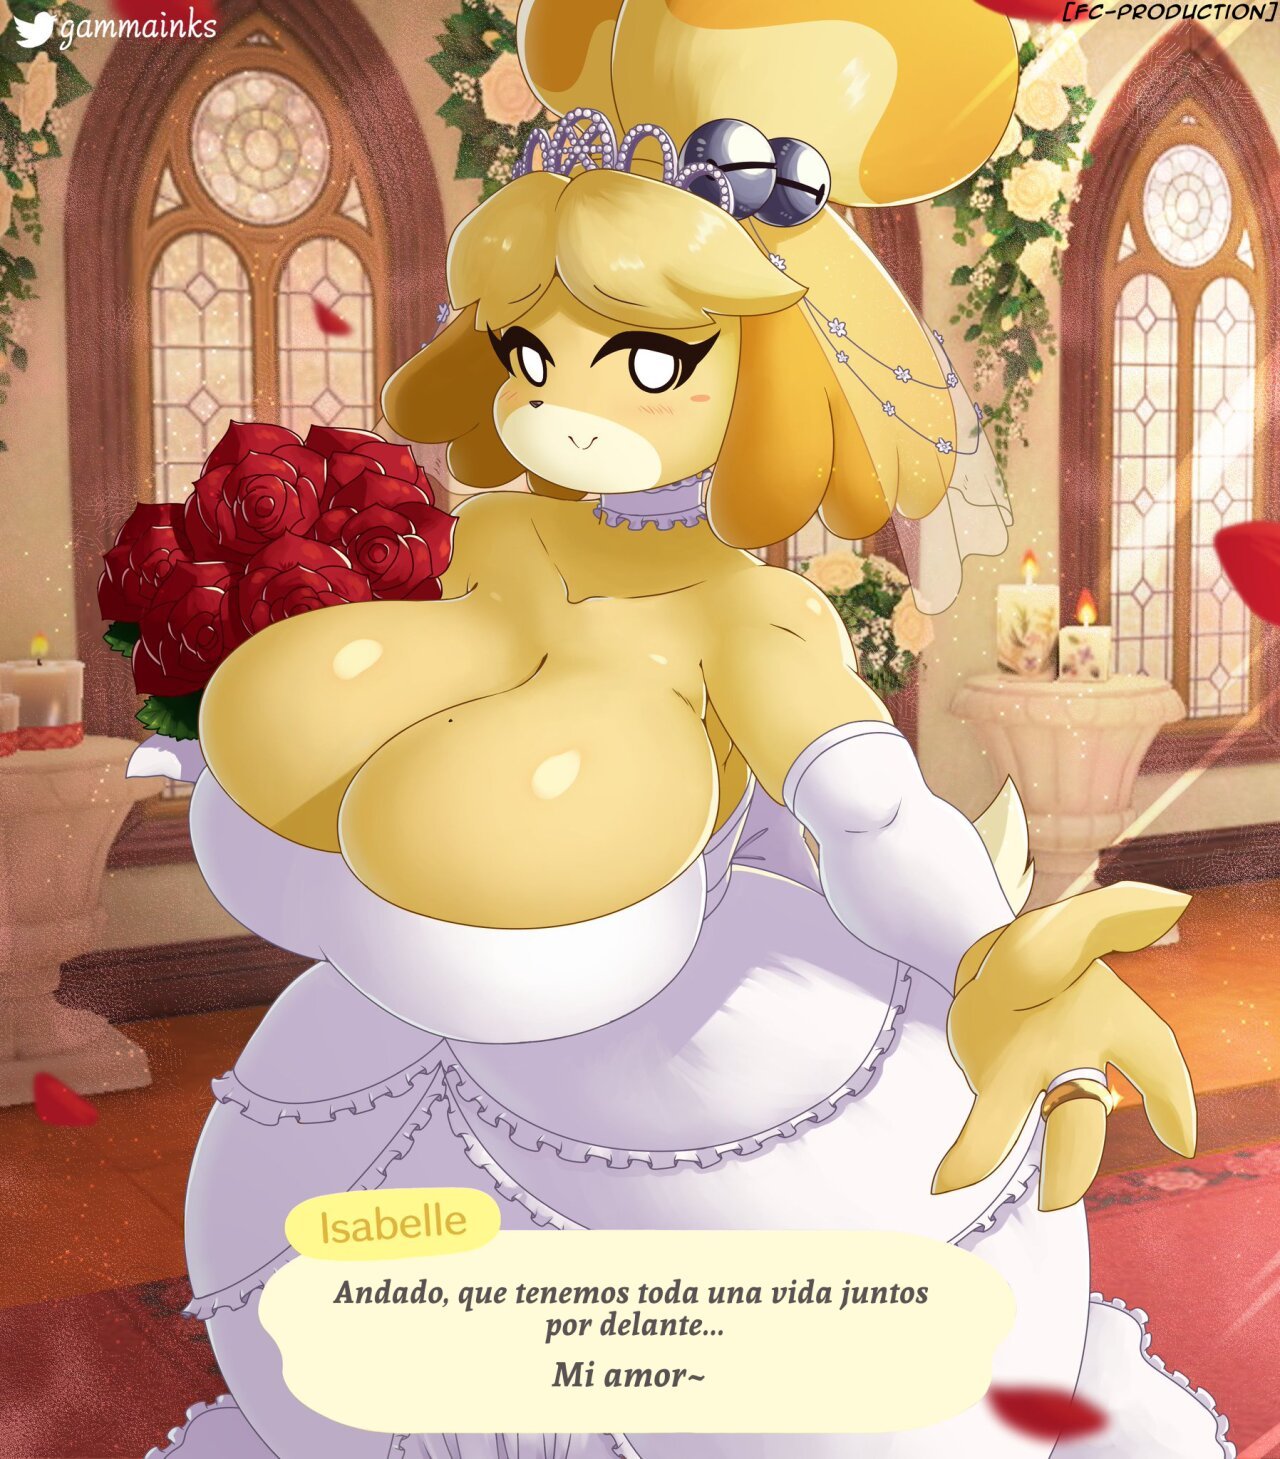 Bonding with Isabelle &#91;Spanish&#93;&#91;Español&#93;&#91;Fc-Production&#93;&#91;Furry&#93; - 13